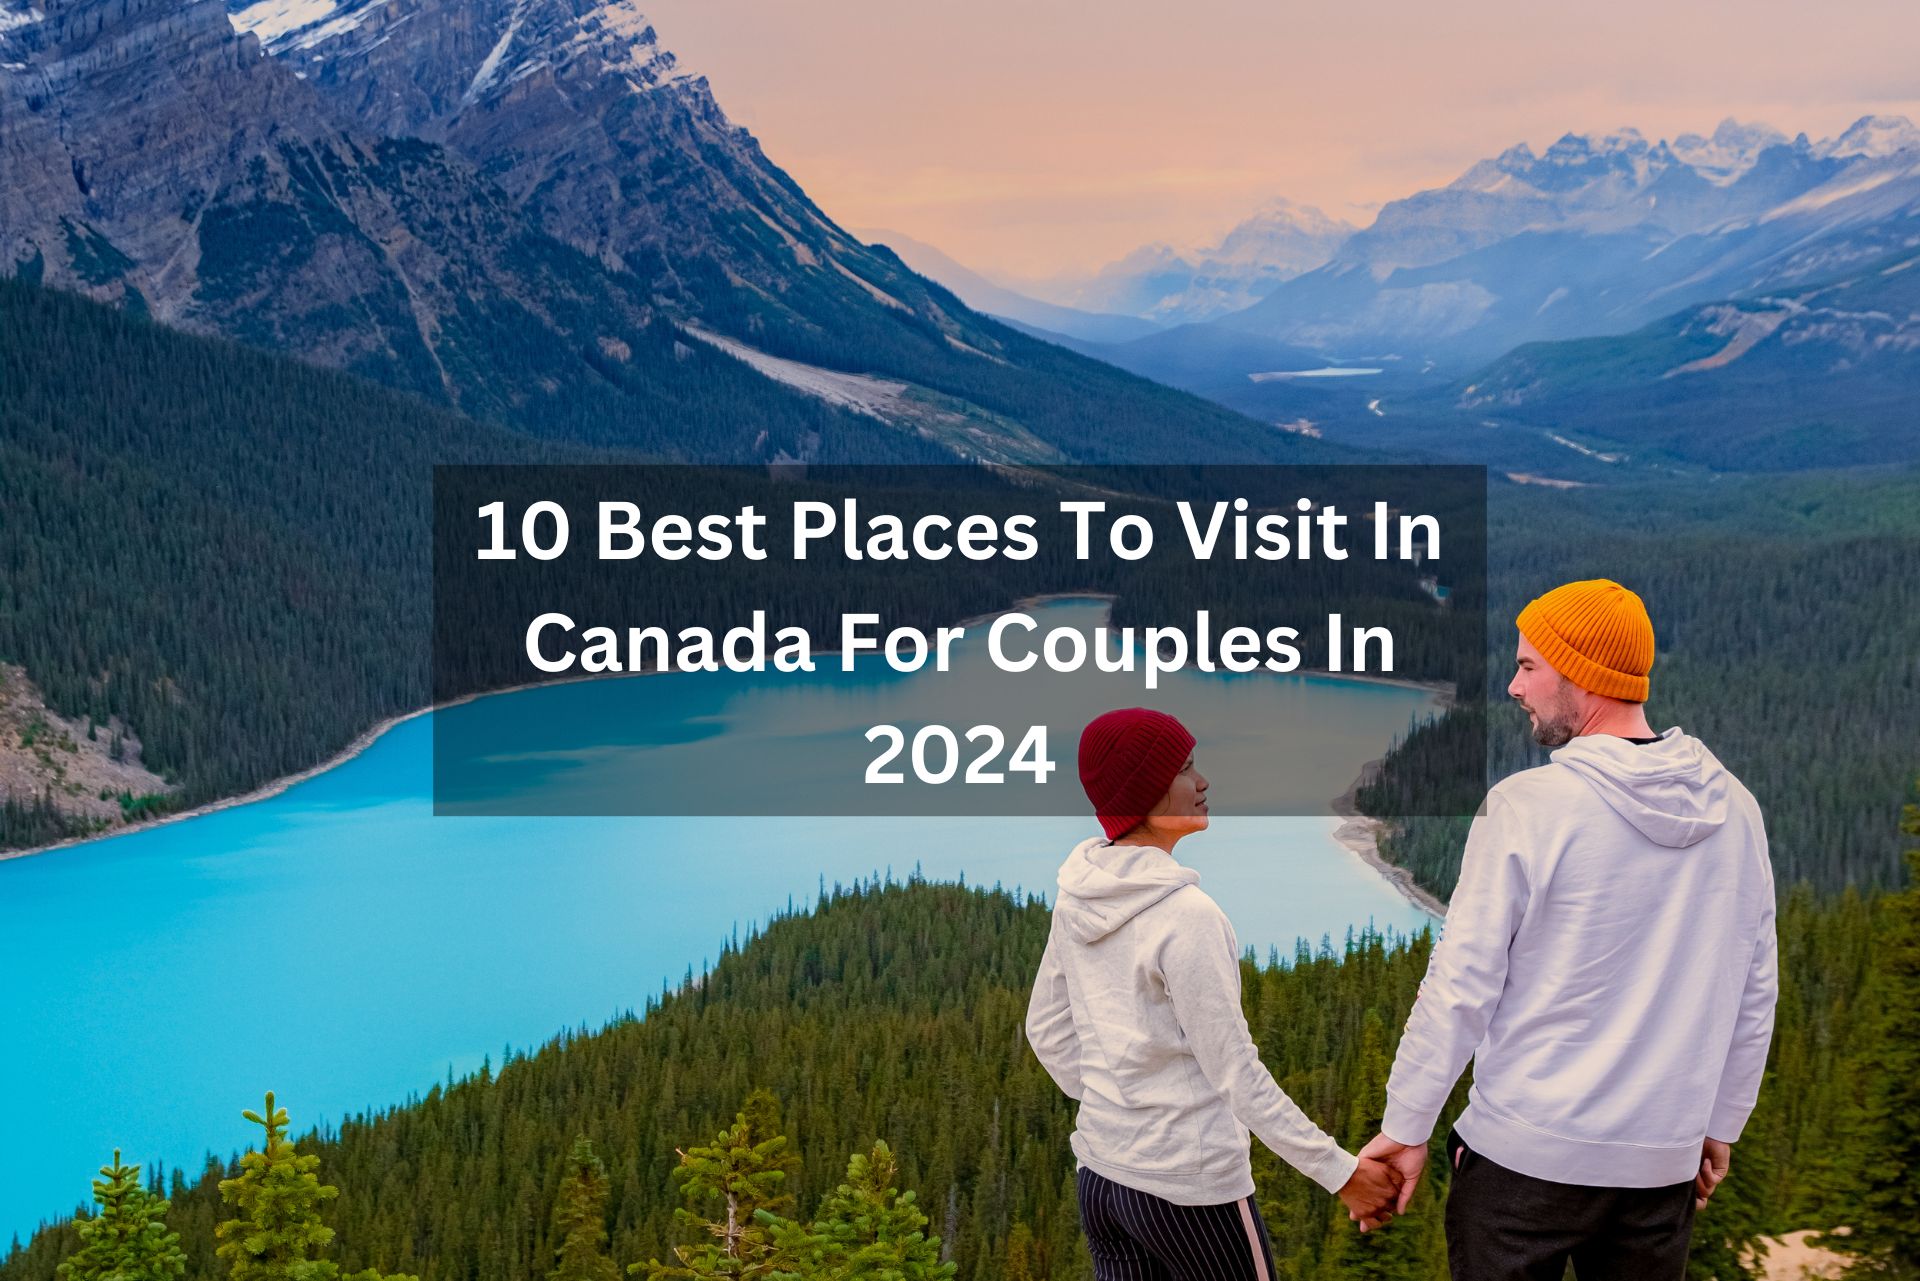 Best Places to Visit in Canada for Couples